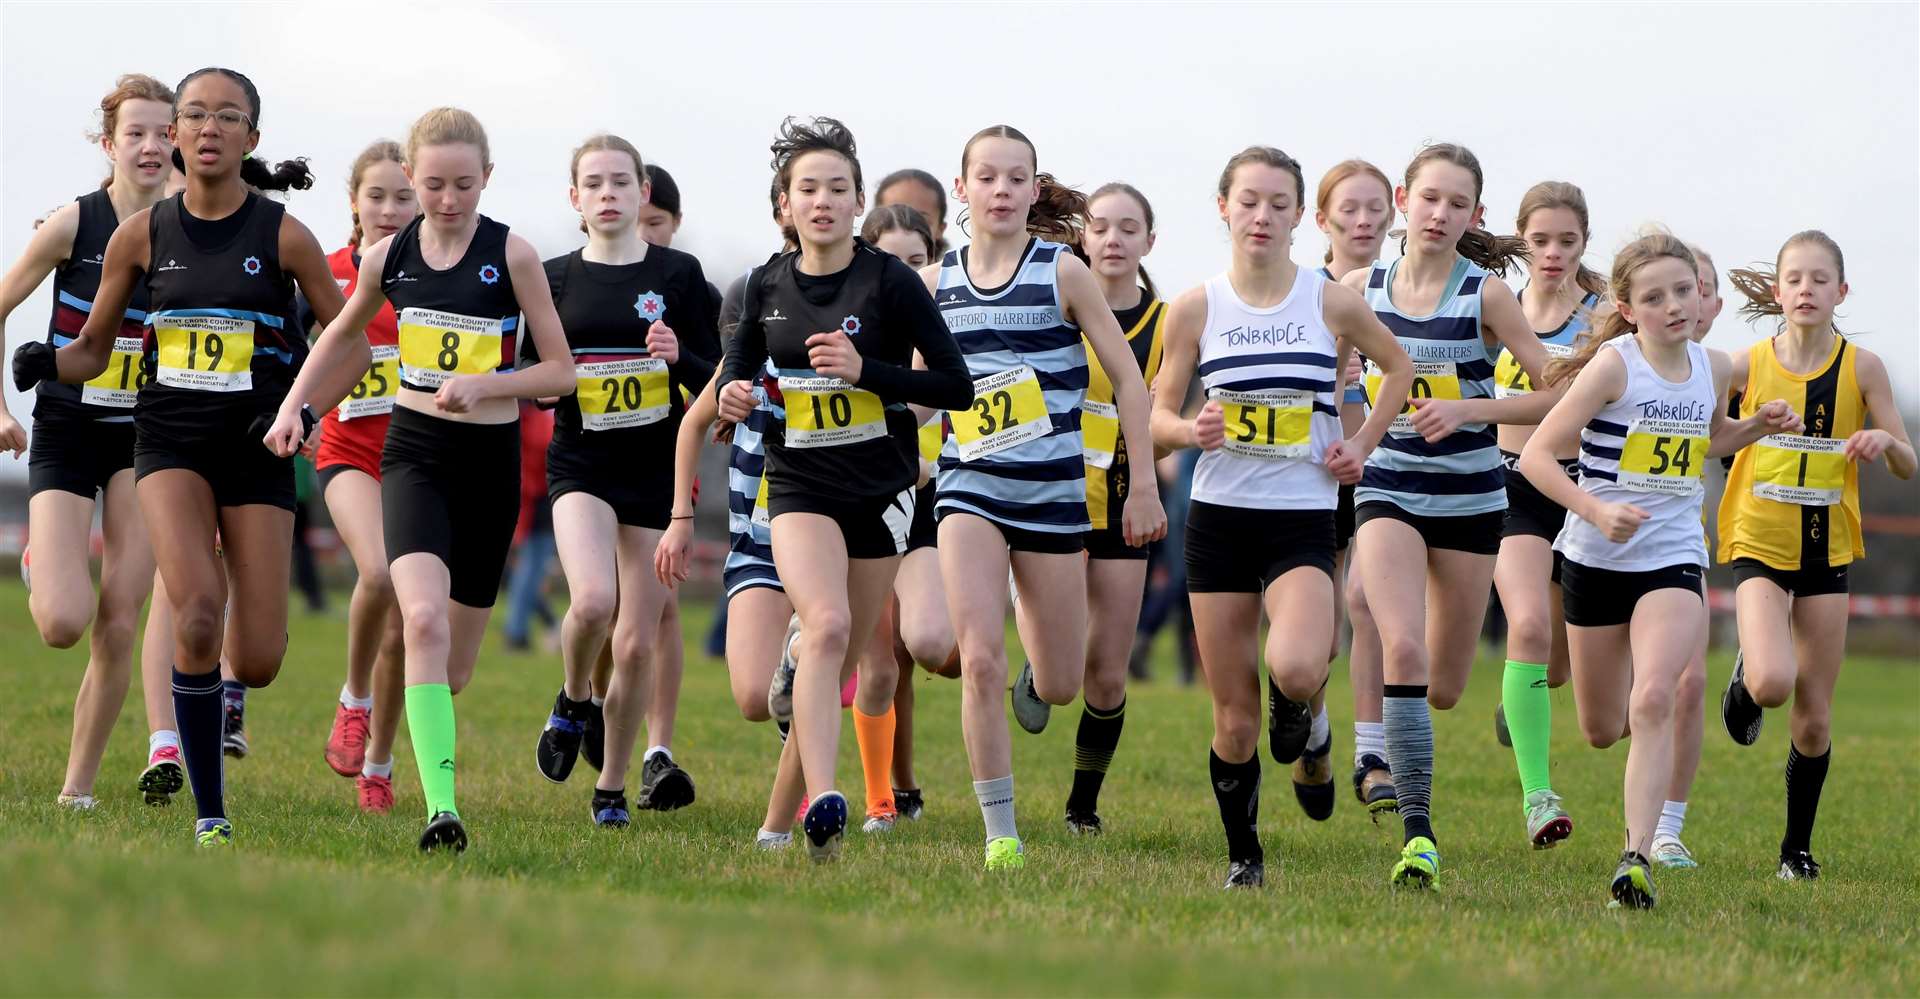 The under-13 girls get up and running before Tonbridge AC’s Purdey Hutchings (No.51) won the race. Picture: Barry Goodwin